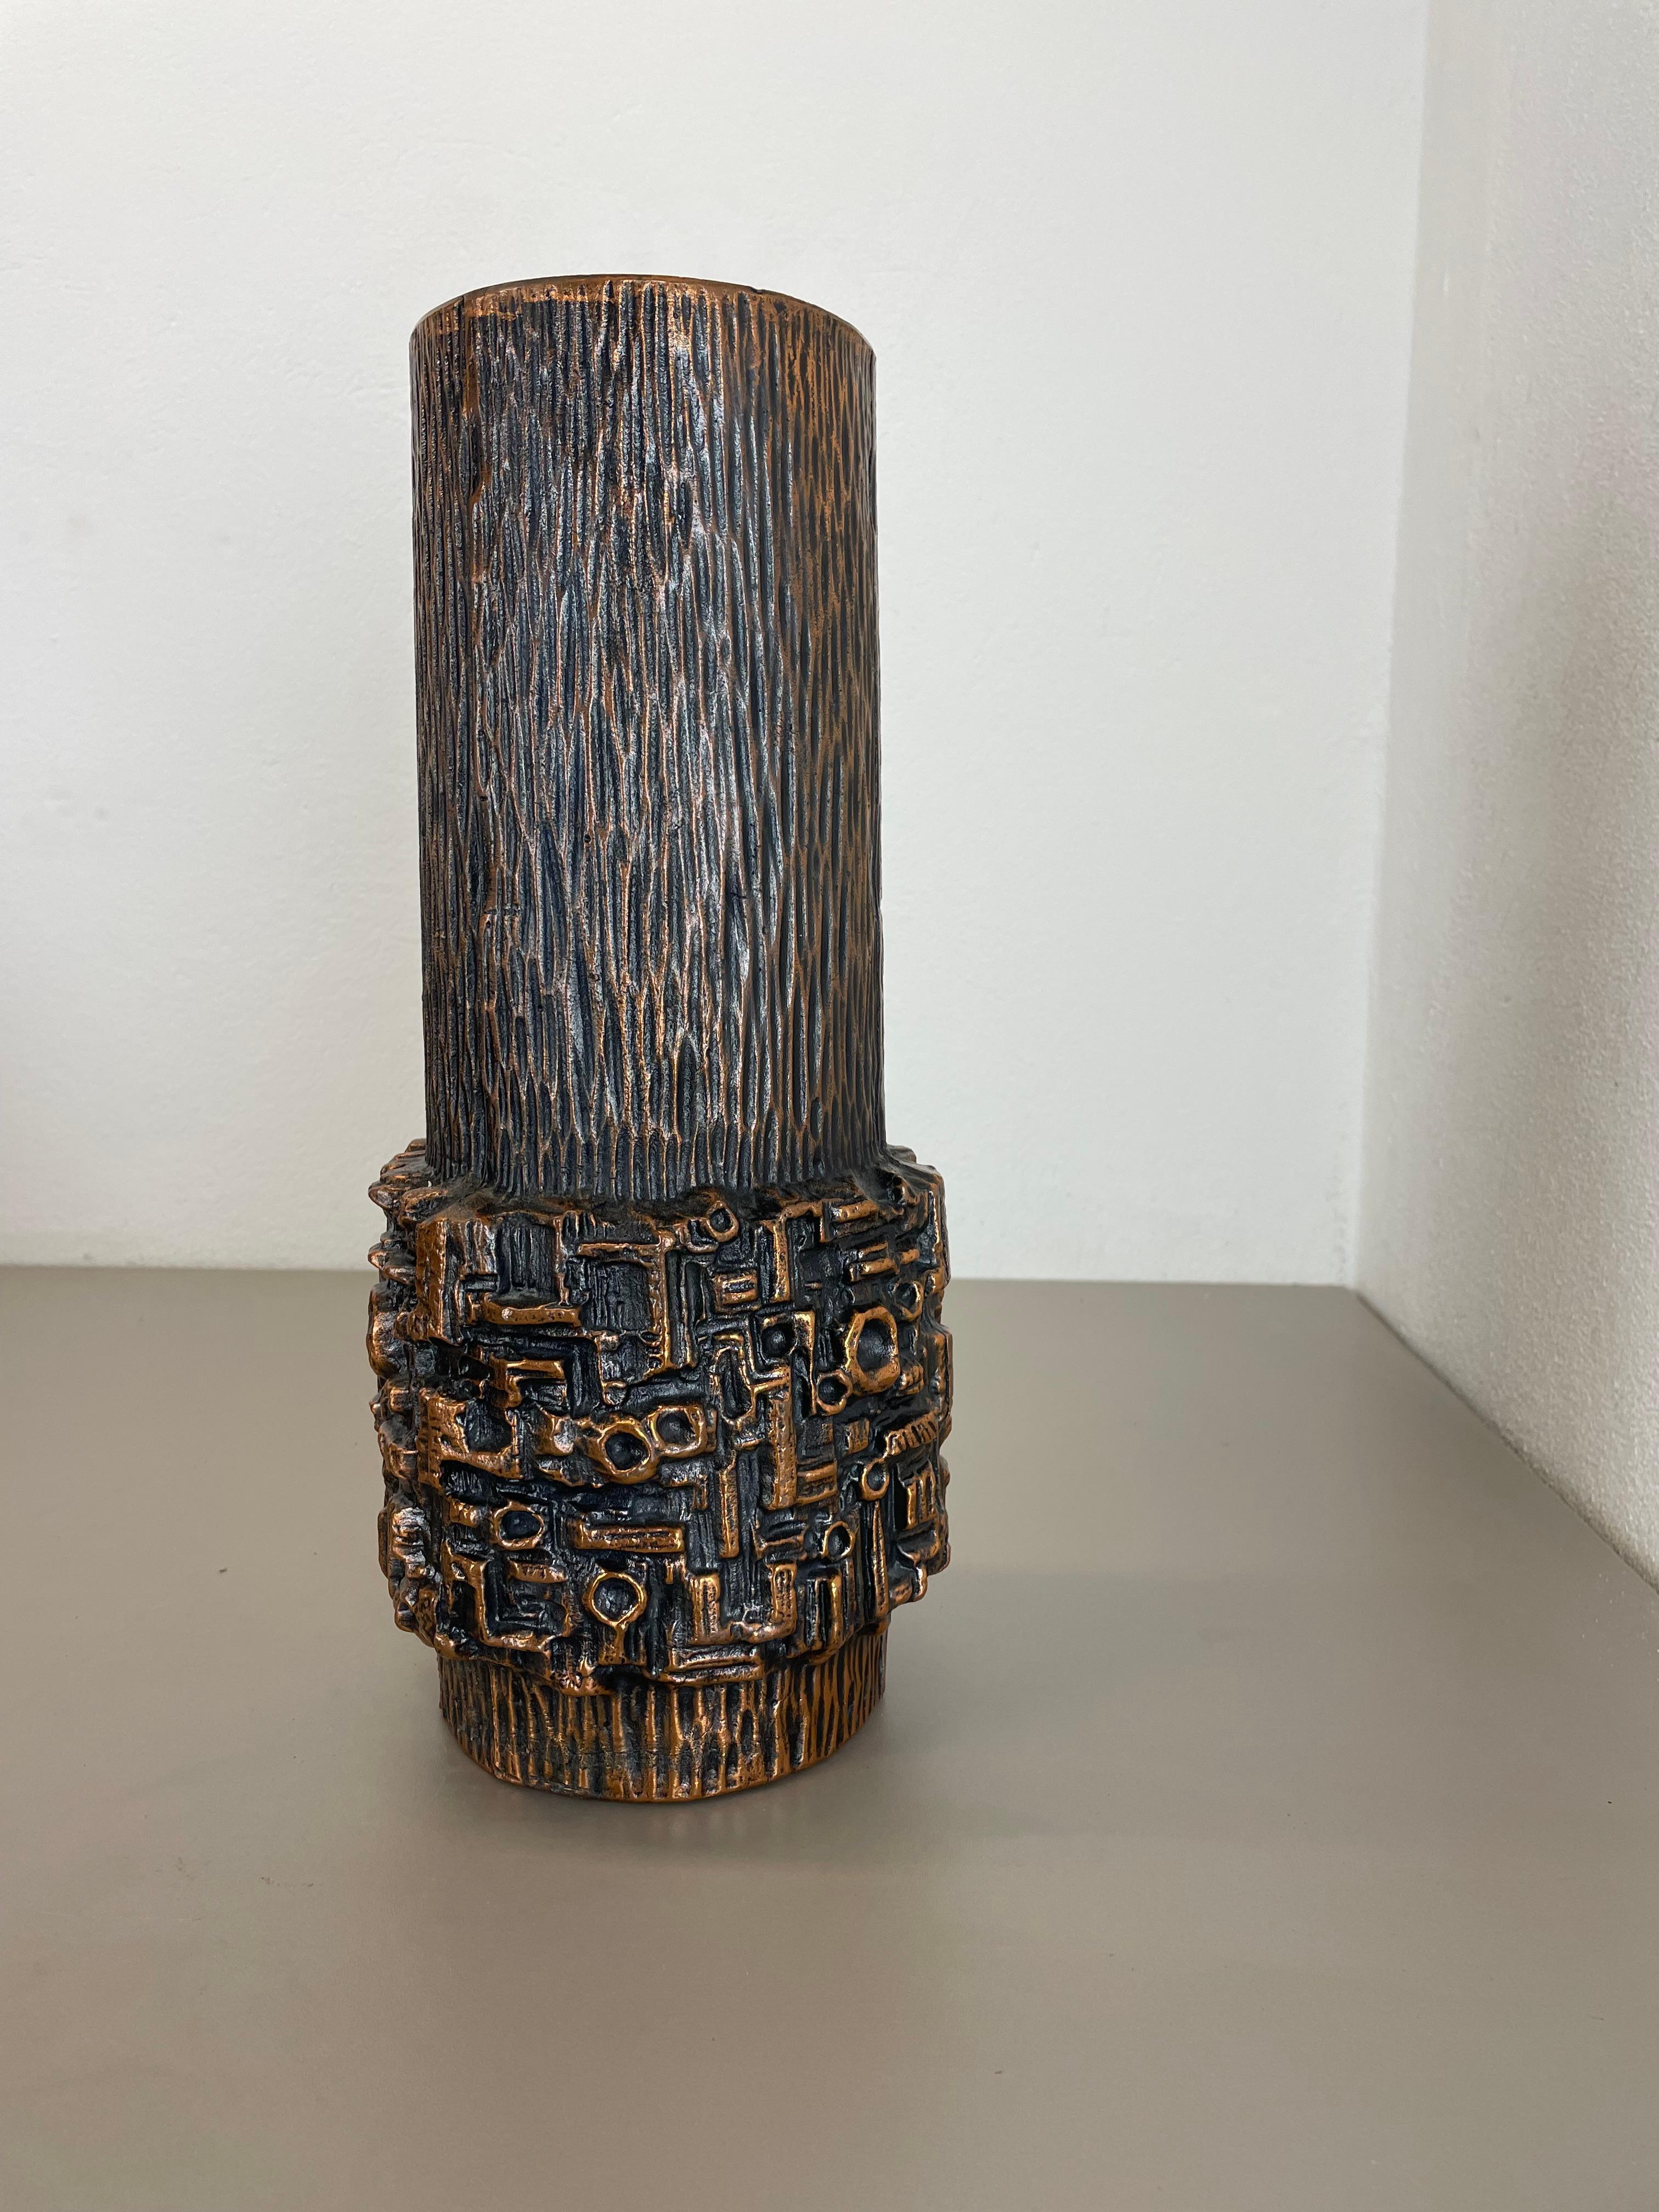 Article: Brutalist vase object

Origin: Germany

Material: Solid metal, probably a copper mixture  weight: 6,7kg

Decade: 1970s

Description: This original vintage vase, was produced in the 1970s in Germany. It is made of solid metal, and has a